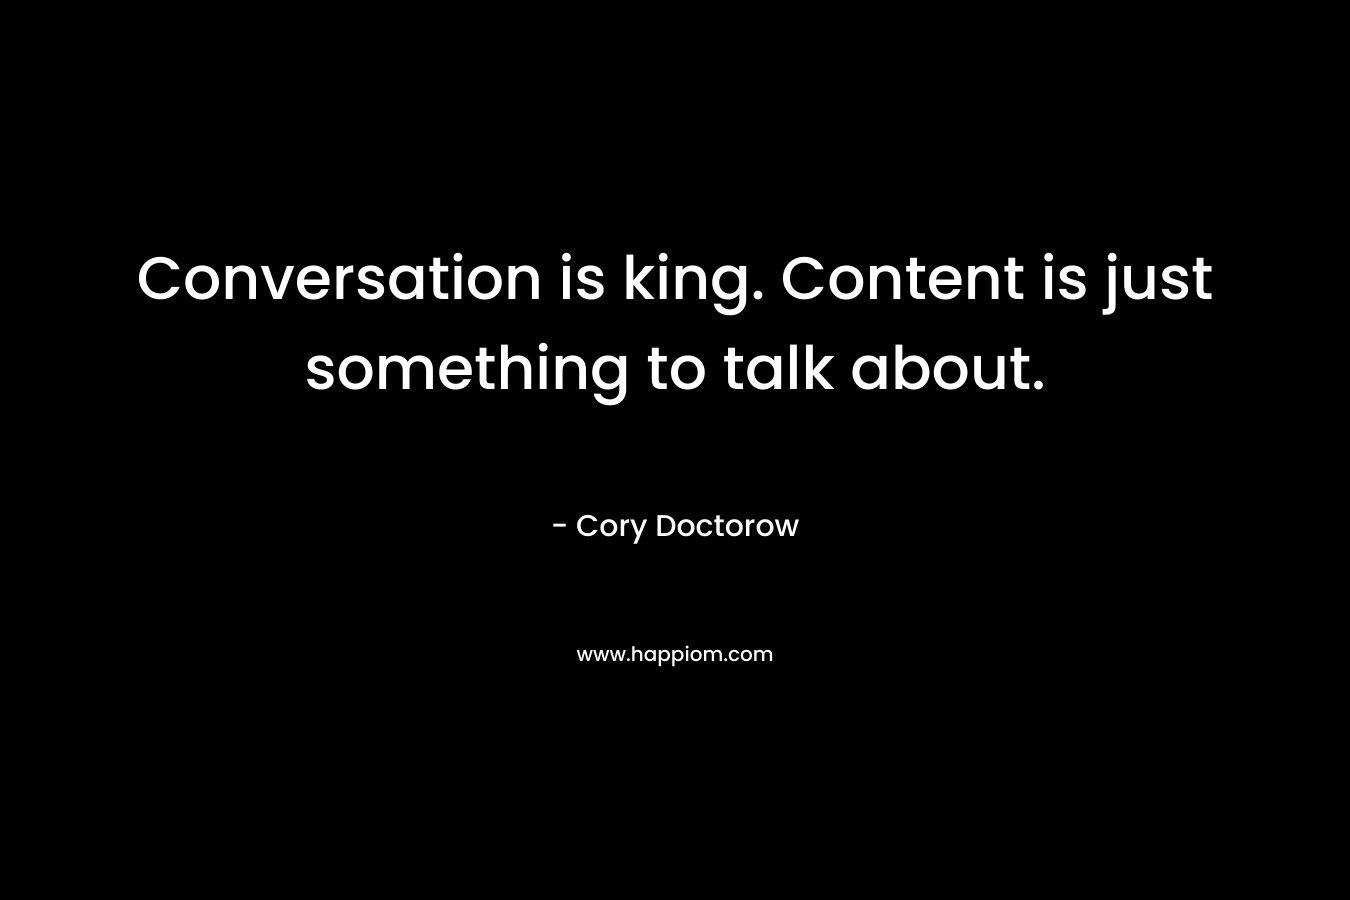 Conversation is king. Content is just something to talk about.